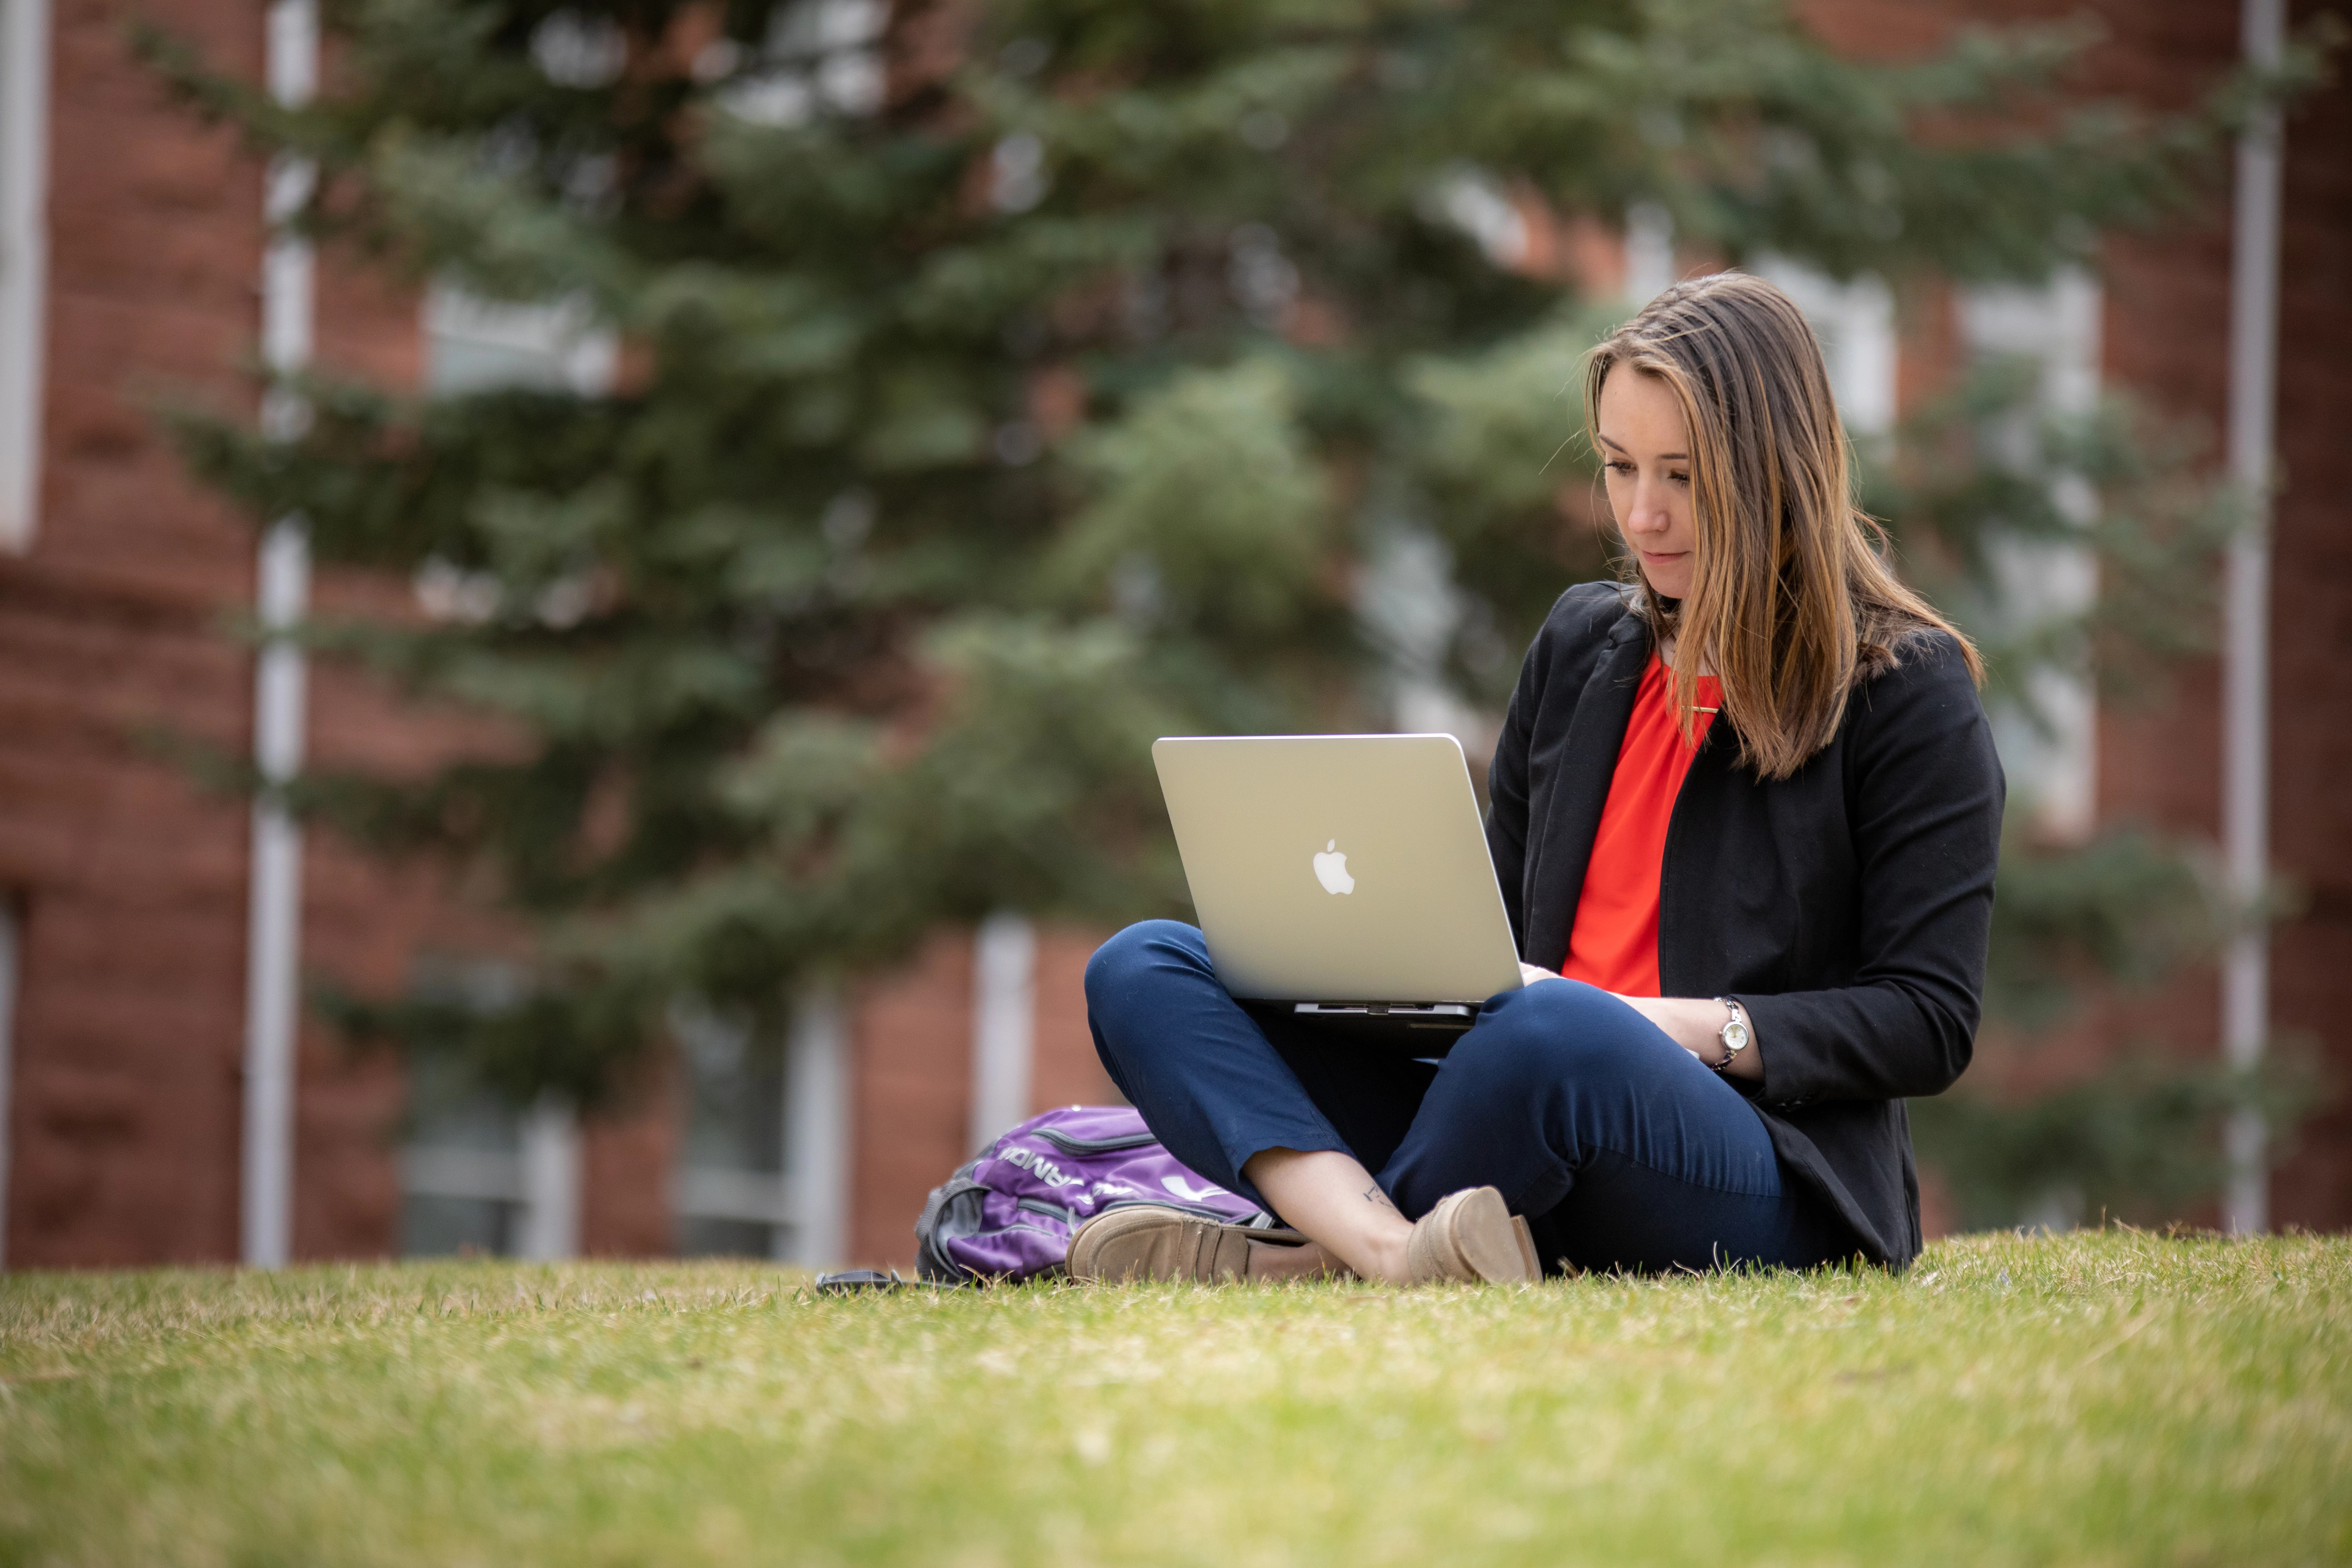 A student sitting on the grass working on her laptop.